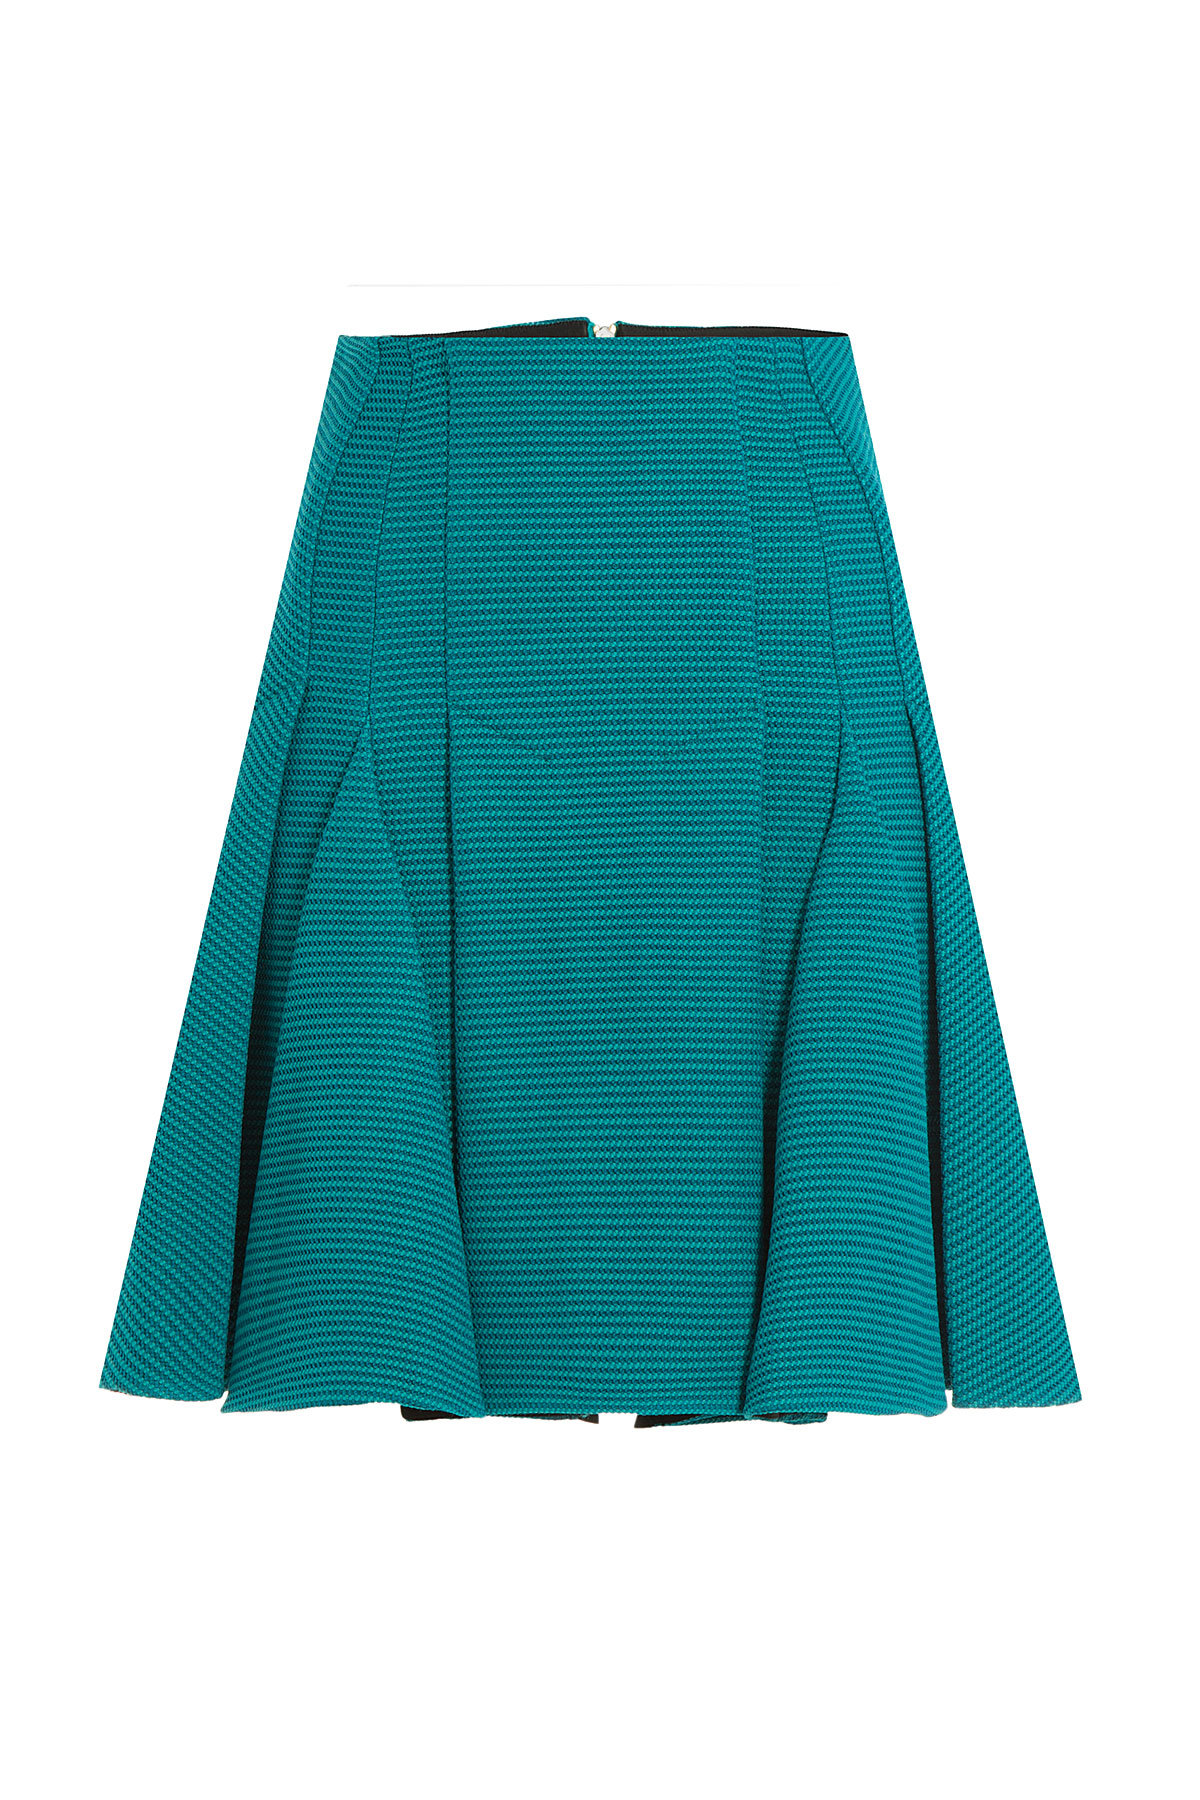 Roland Mouret - Flared Skirt with Wool